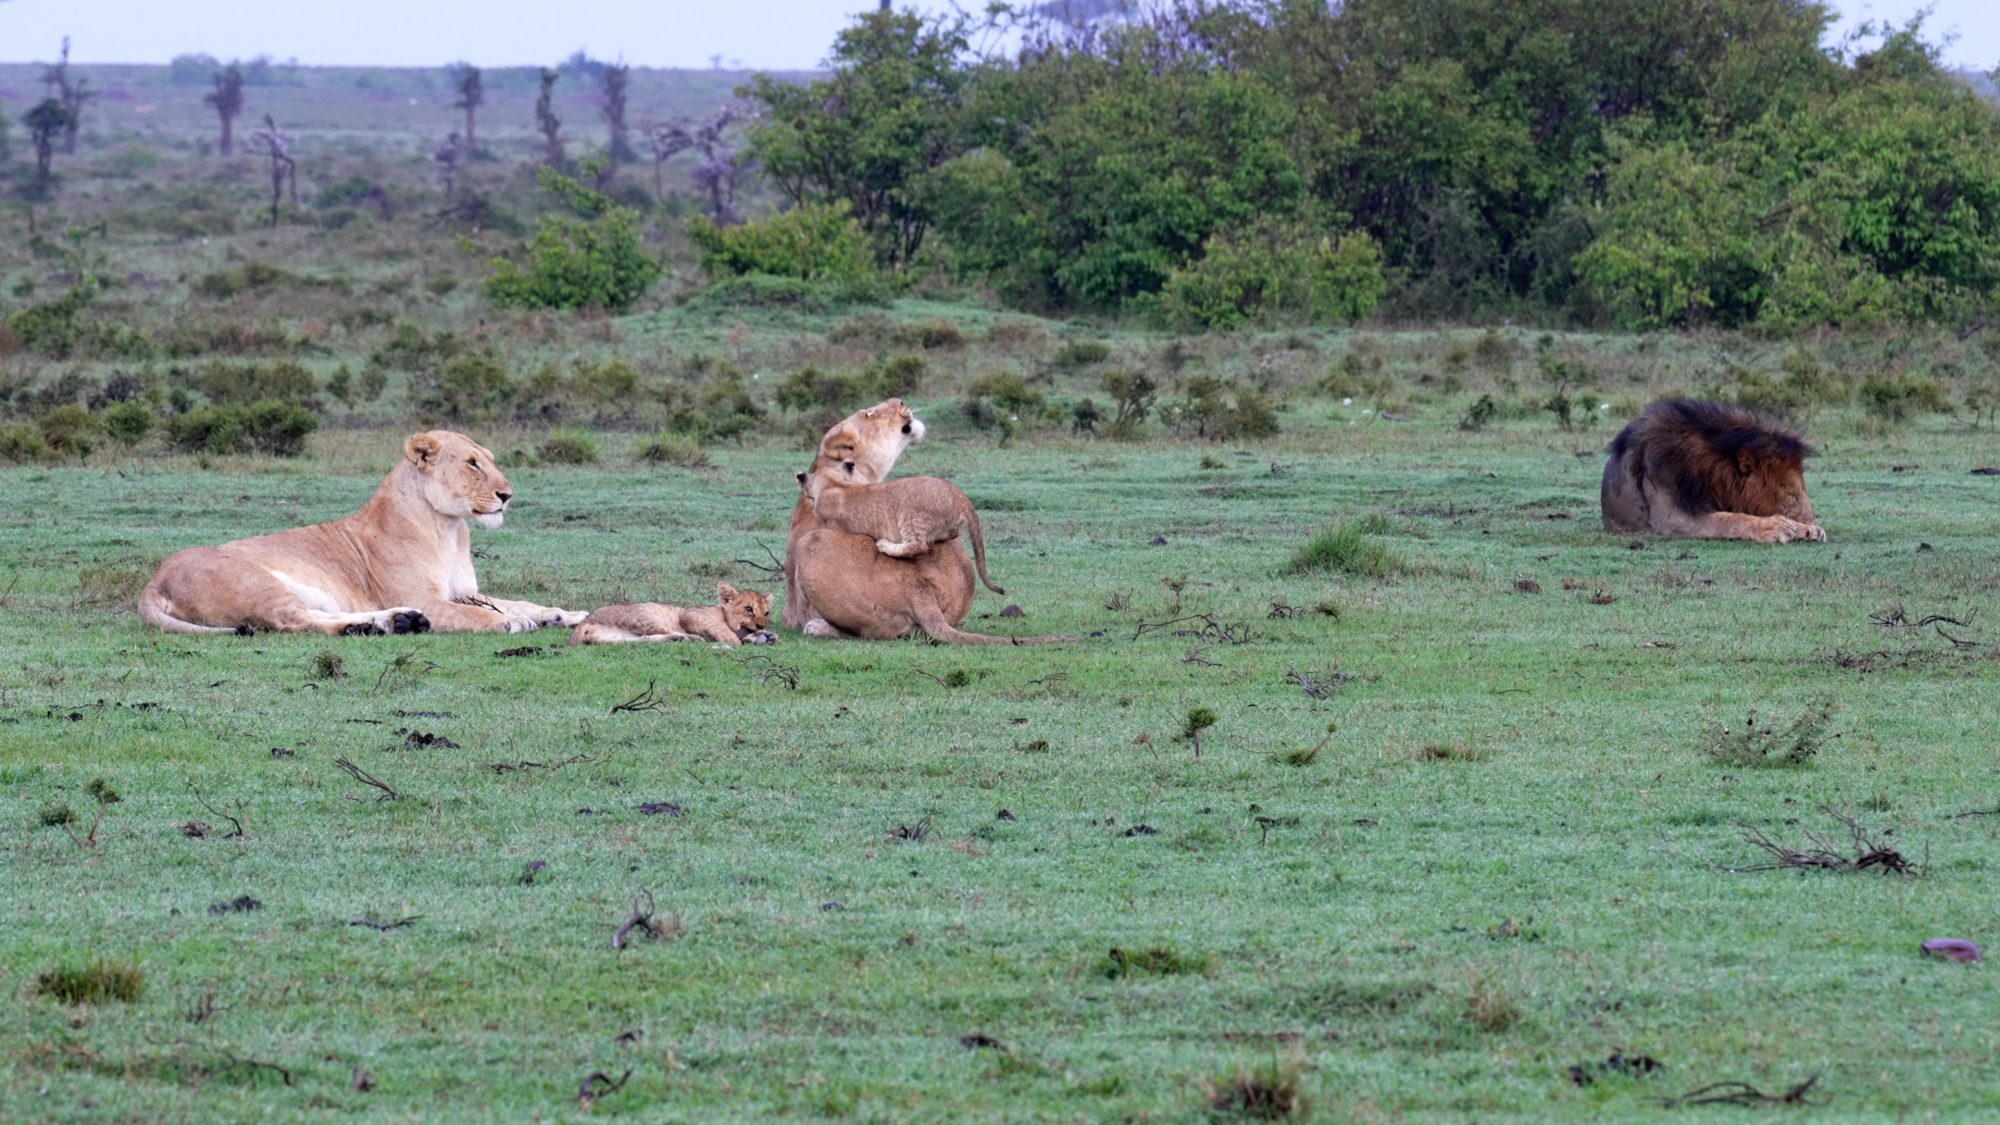 With a pride of Lions: cubs play with lionesses; lionesses play with cubs – Maasai Mara 2023